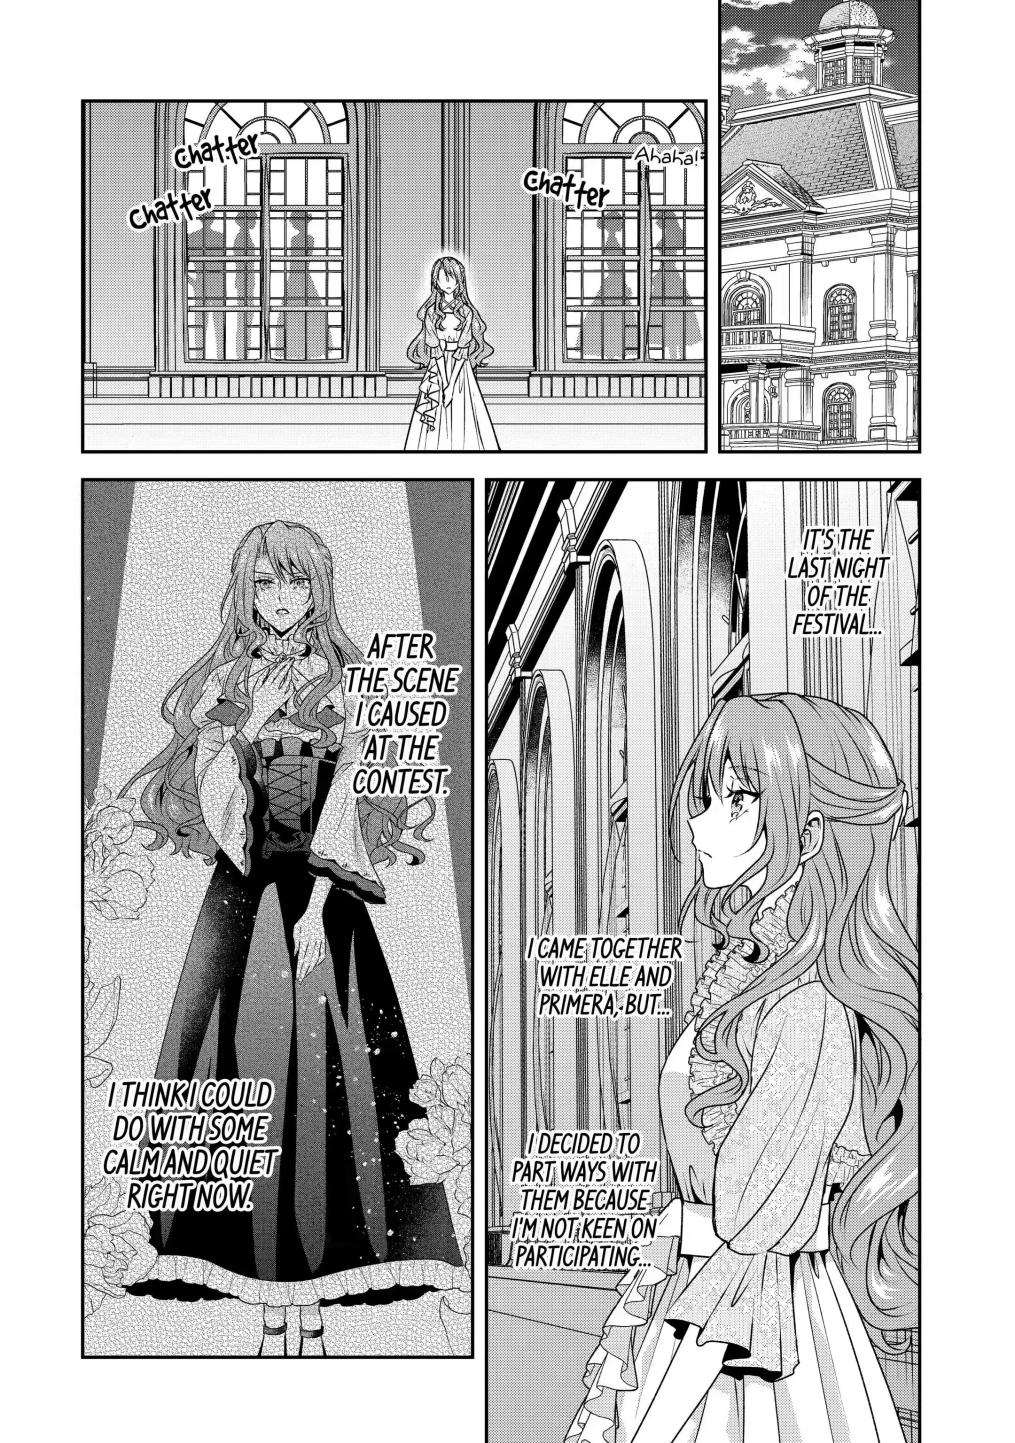 Auto-Mode Expired In The 6Th Round Of The Otome Game - Page 3